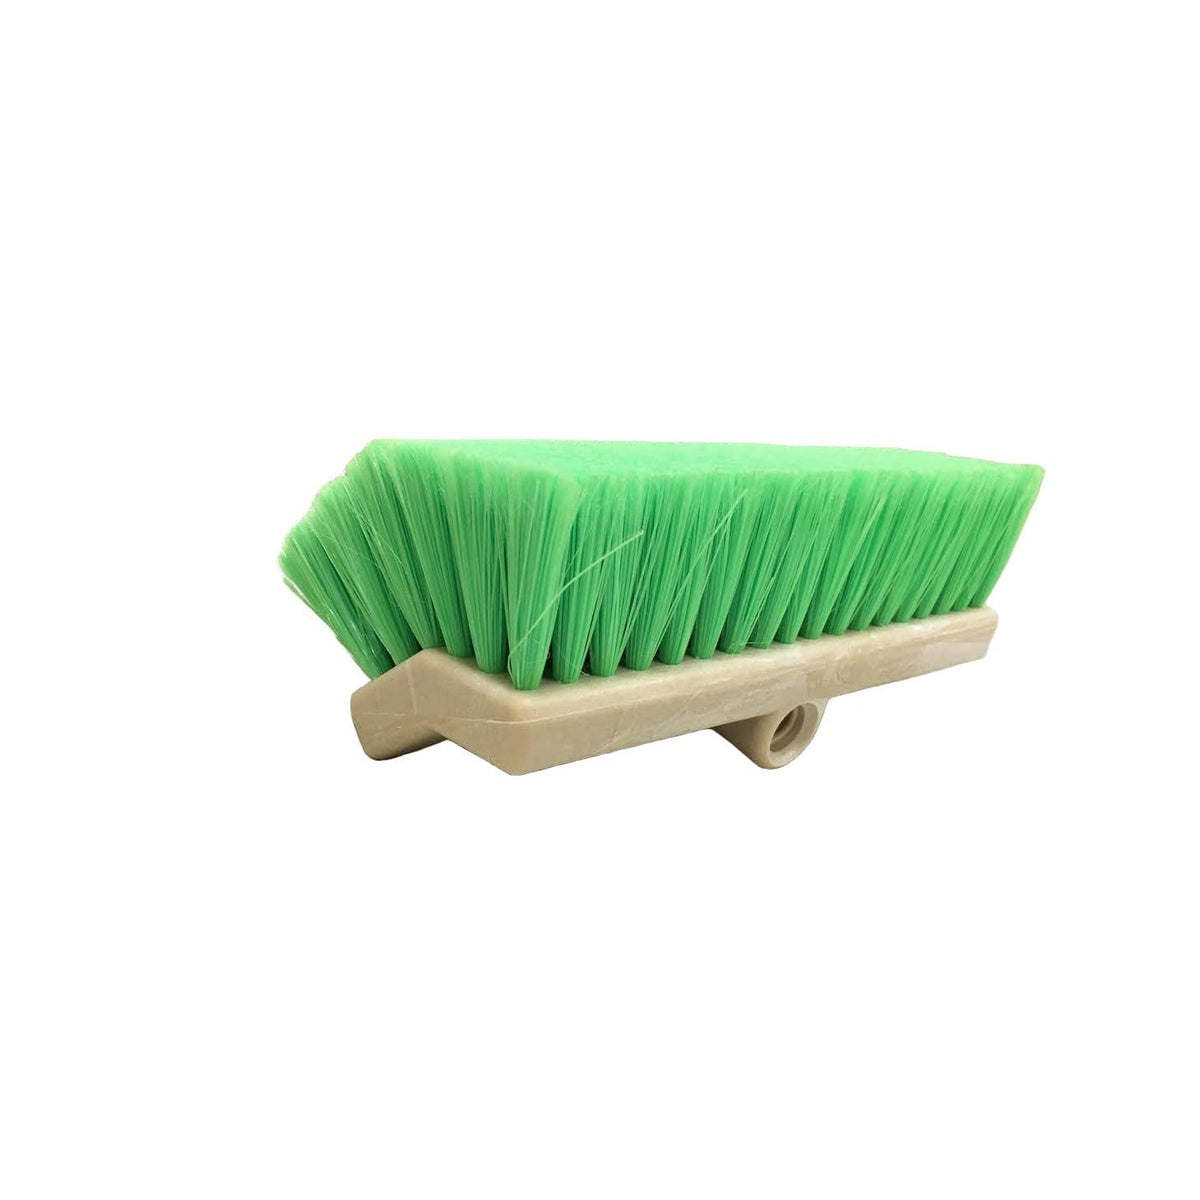 Easy Reach Qualifies for Free Shipping Easy Reach Extra Soft Flagged Nyltex Wash Brush 10" #195